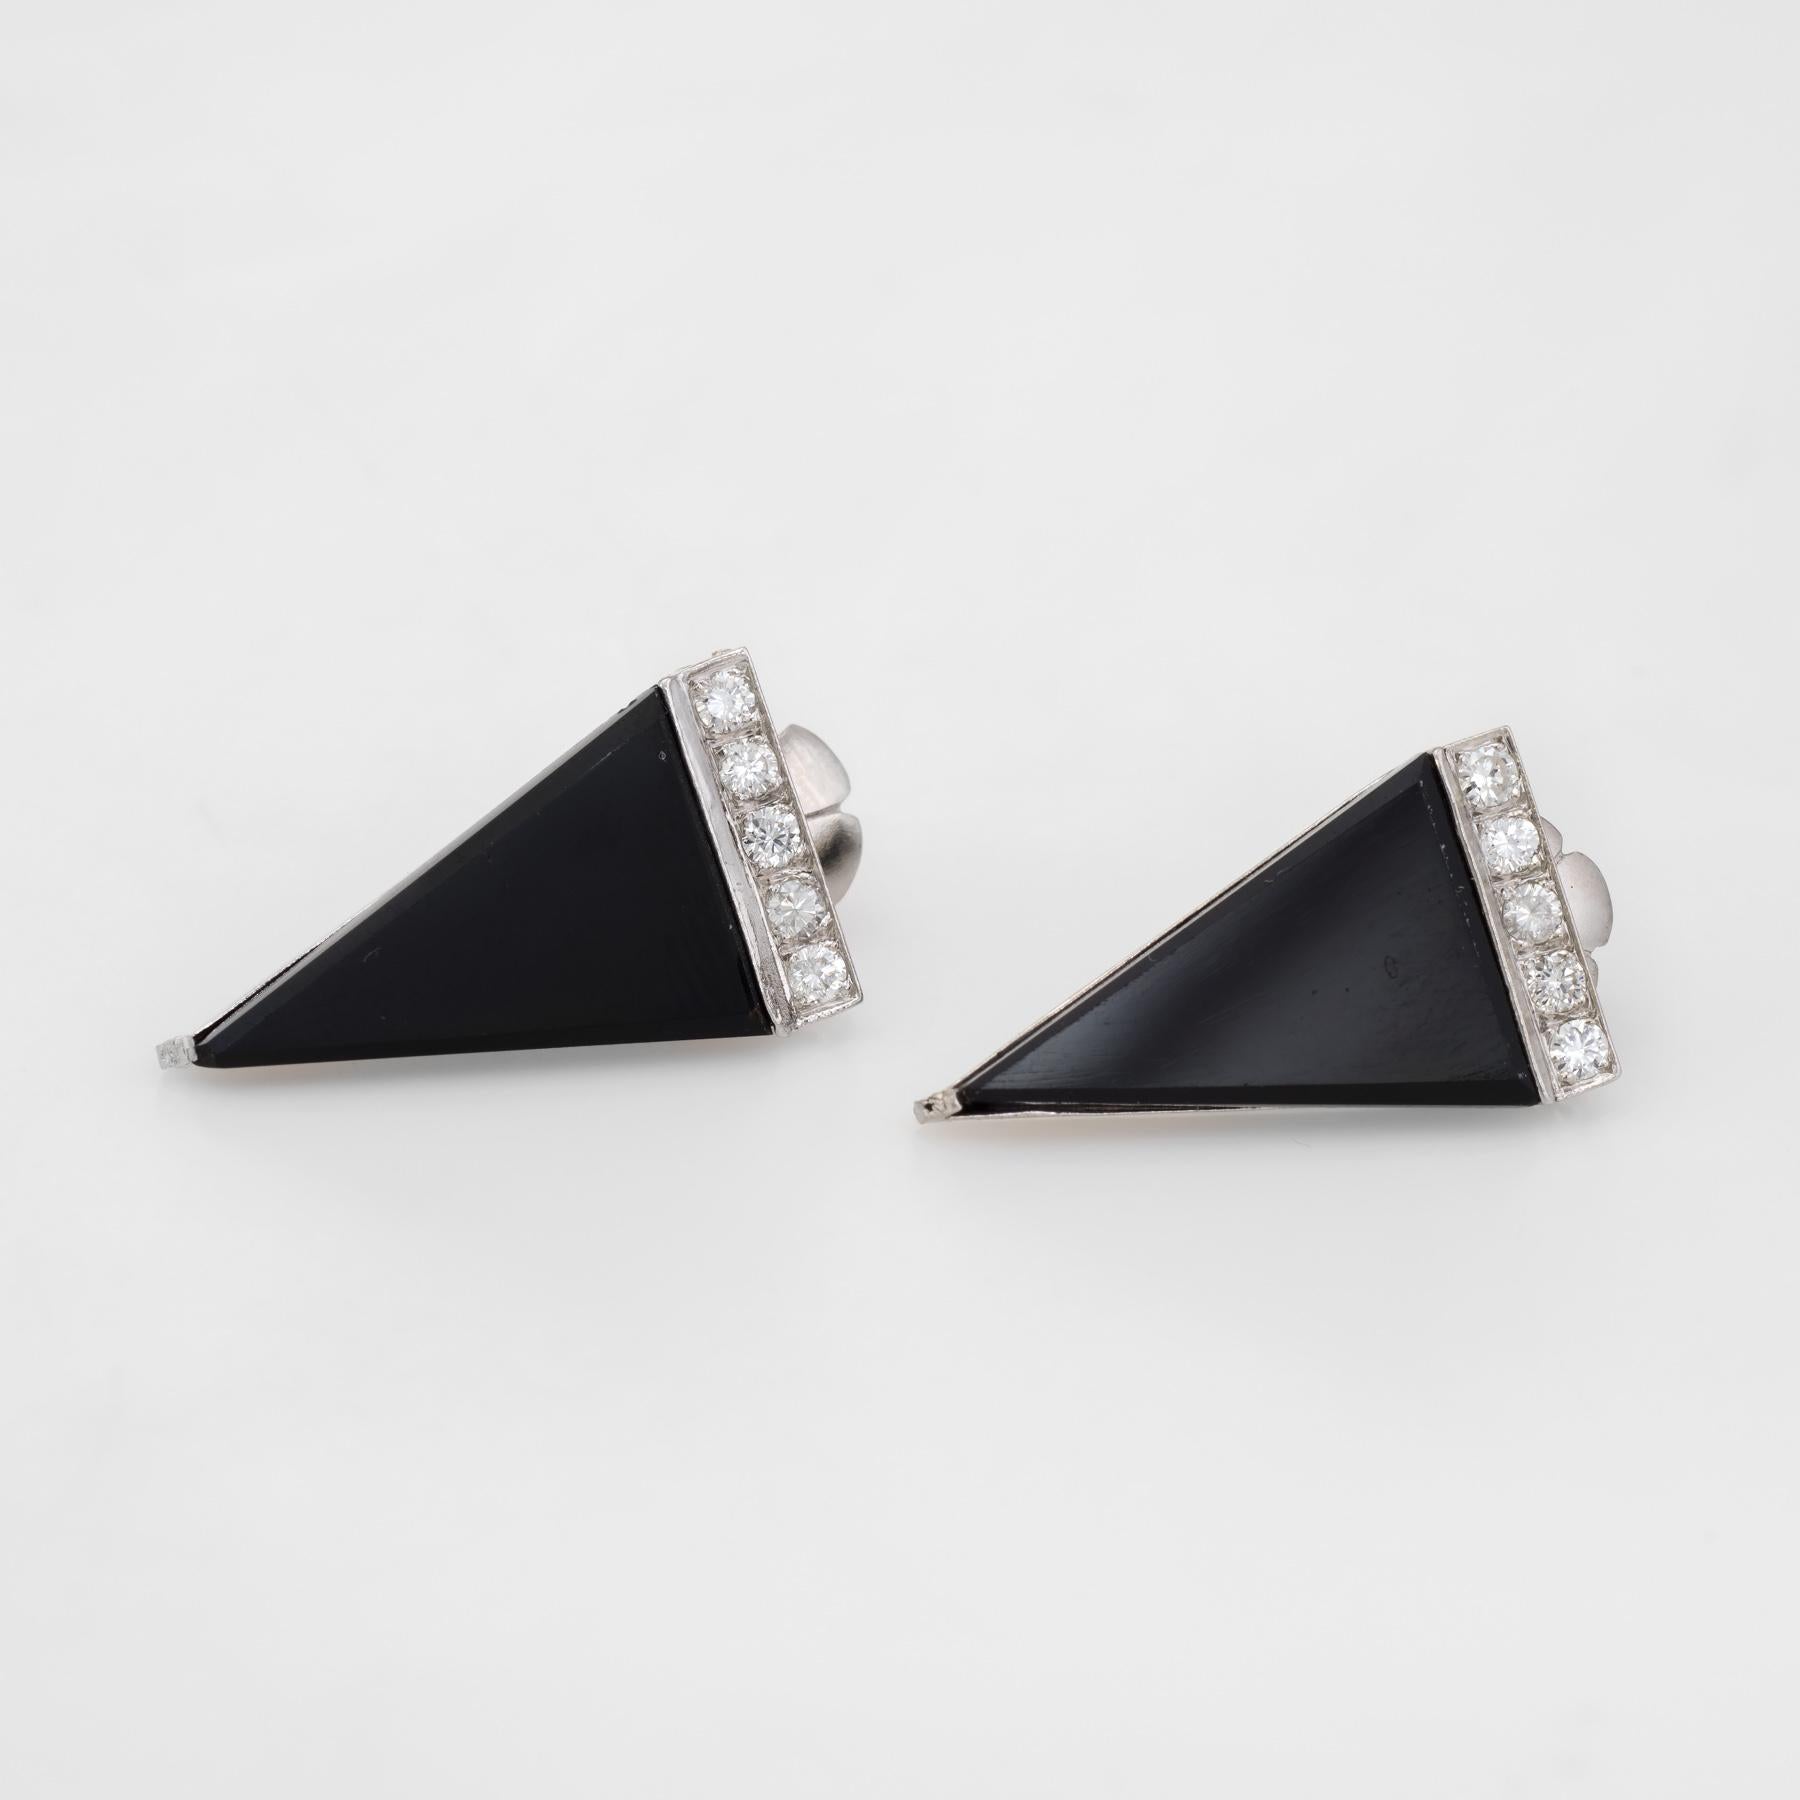 Striking pair of vintage triangle earrings, crafted in 900 platinum. 

Onyx is triangular cut and measures 19mm x 11mm, accented with a row of round brilliant cut diamonds. The 10 diamonds are estimated at 0.04 carats each, totaling an estimated